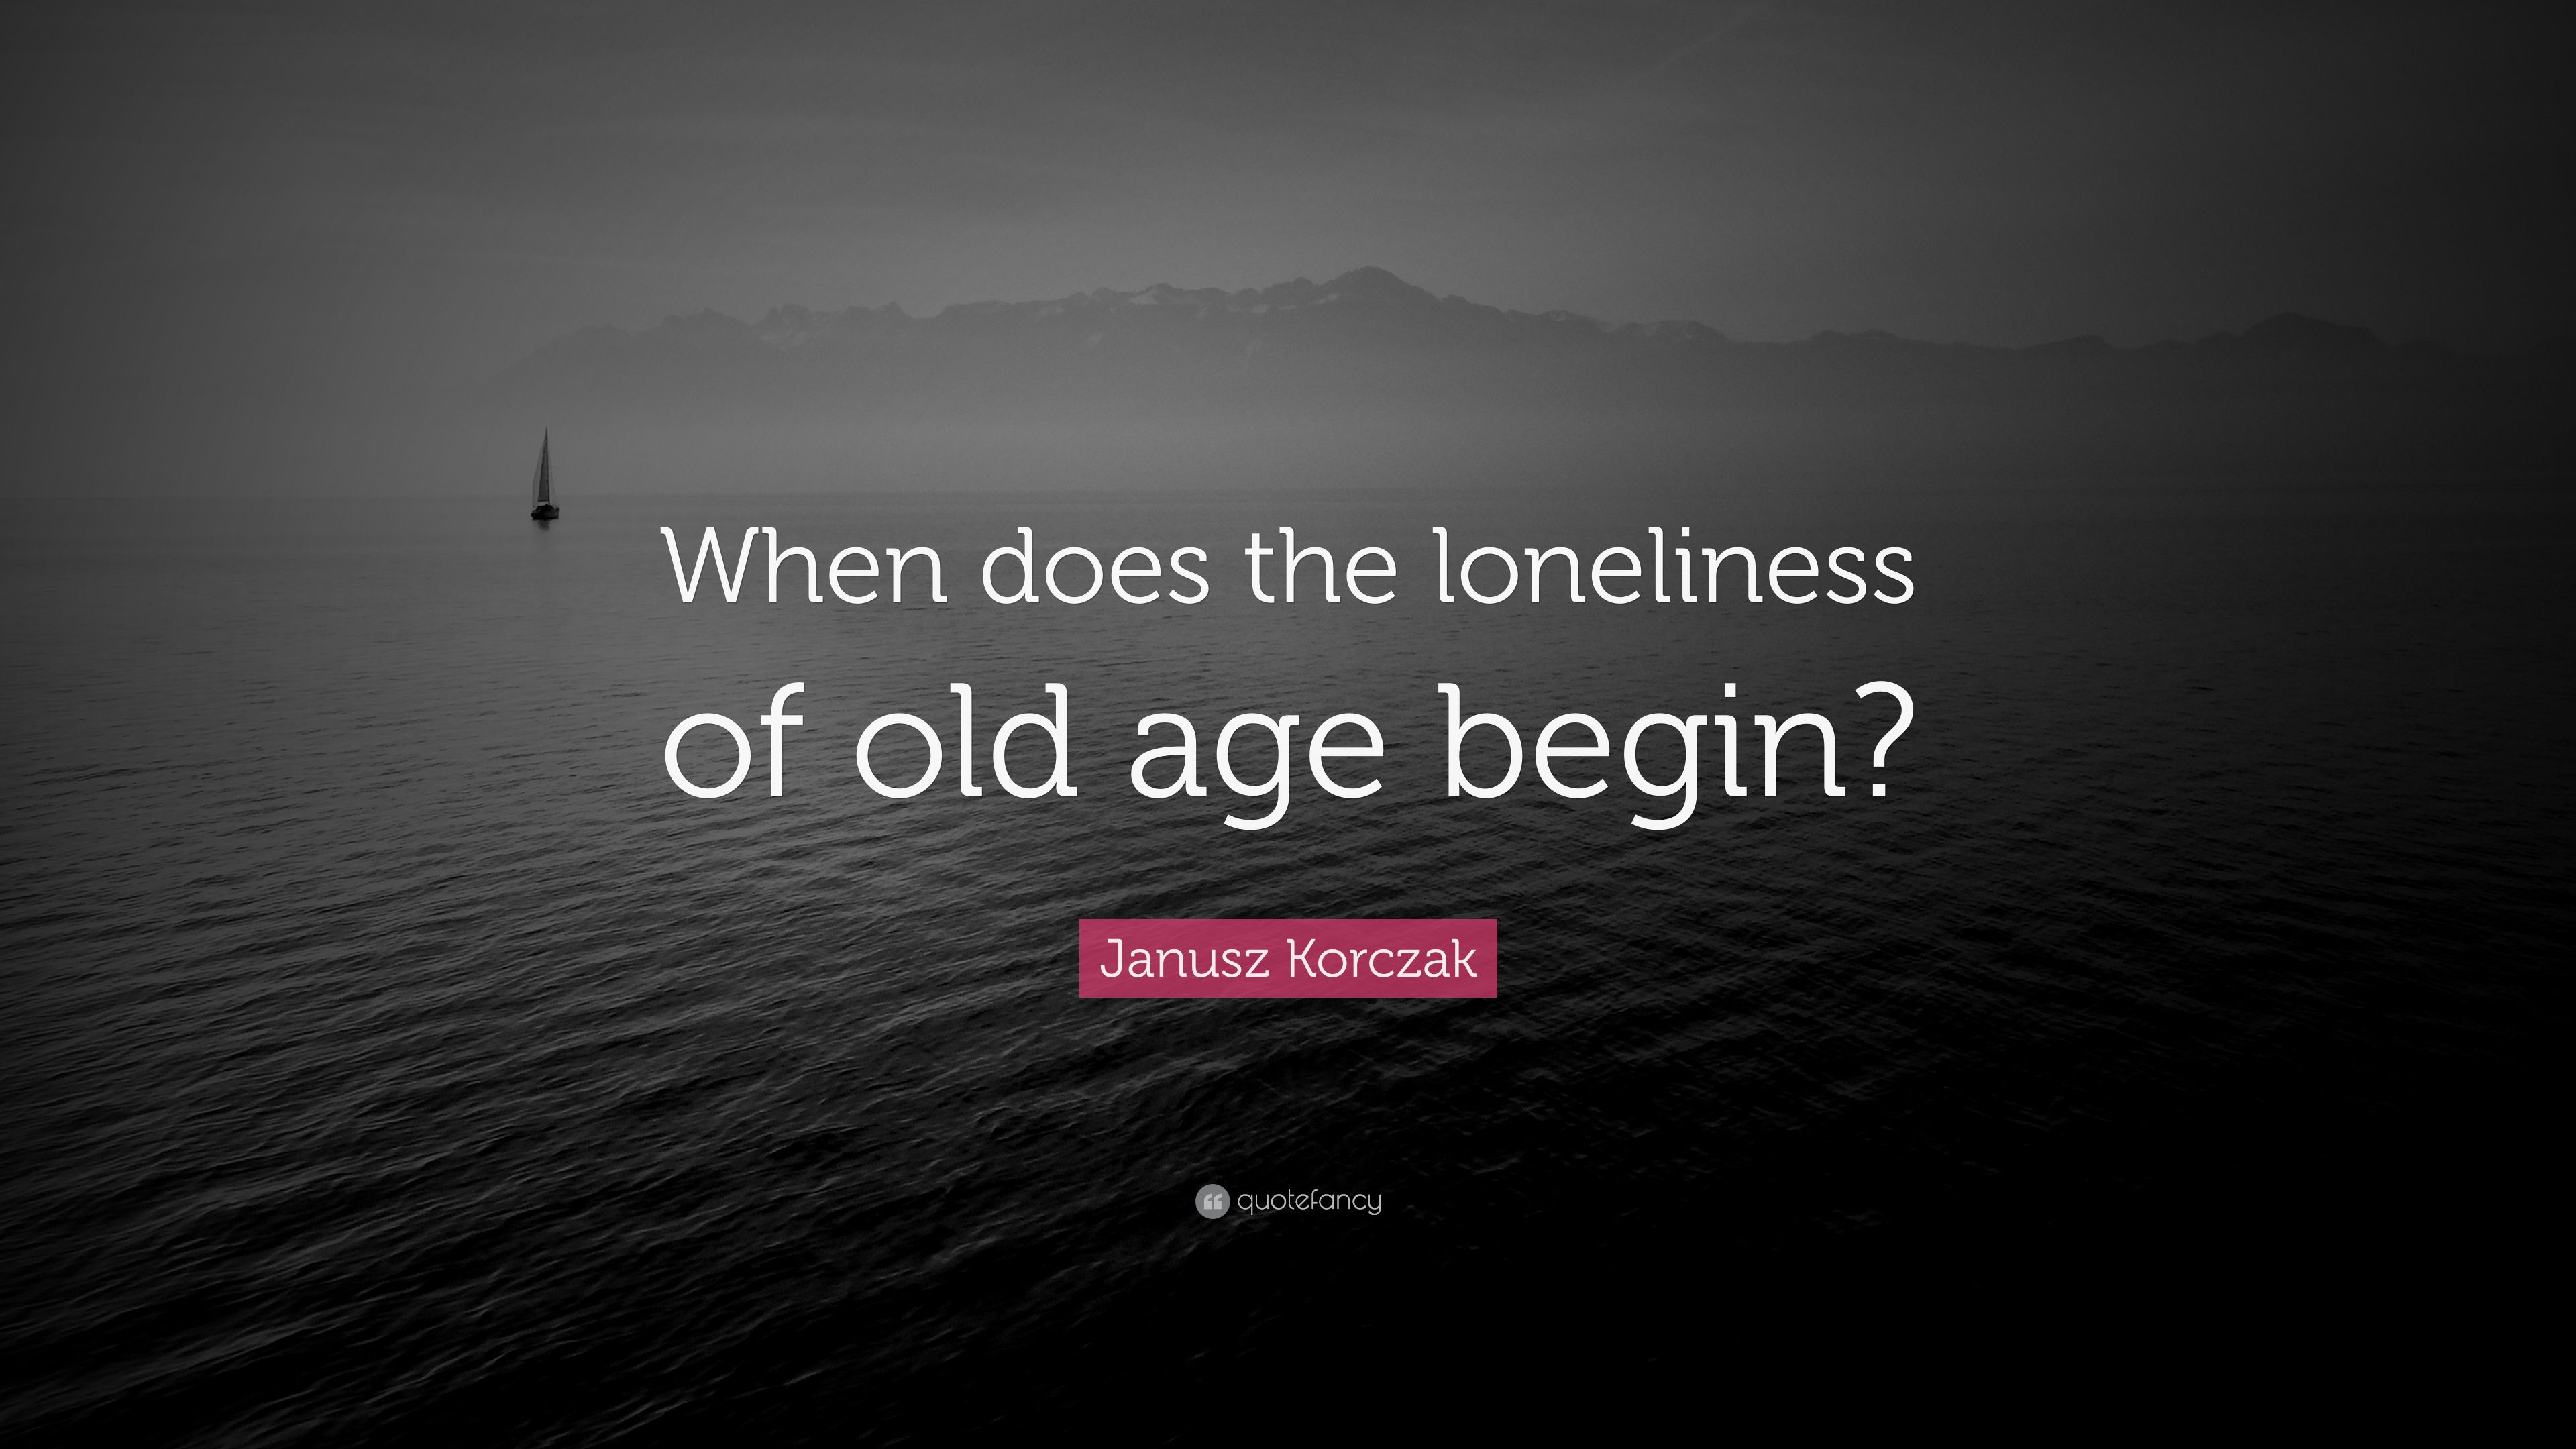 Janusz Korczak Quote: “When does the loneliness of old age begin?” (7 wallpaper)